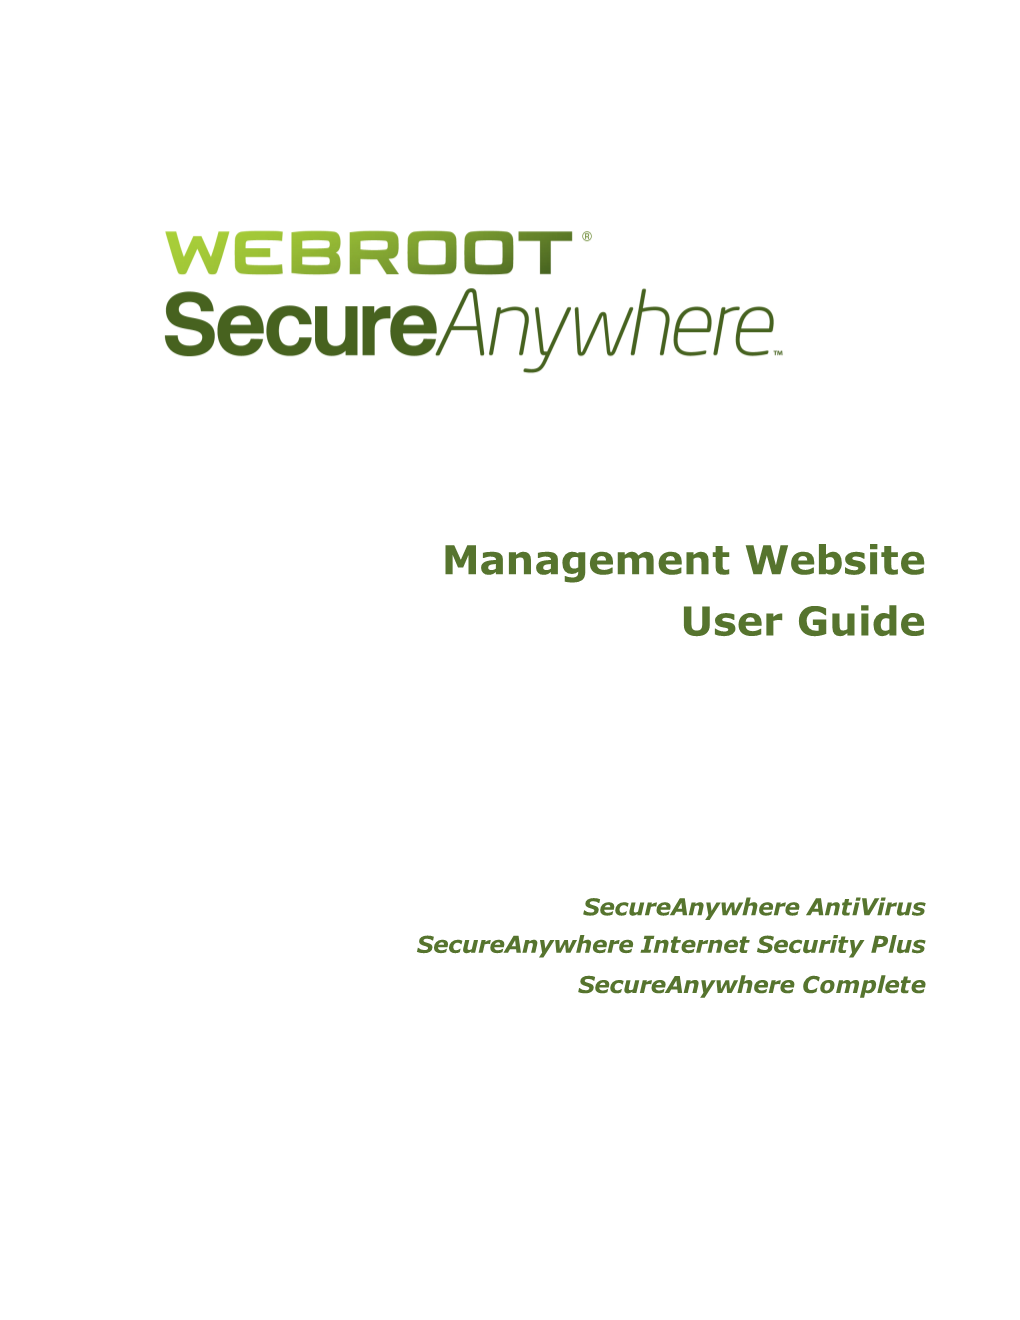 Secureanywhere Website User Guide